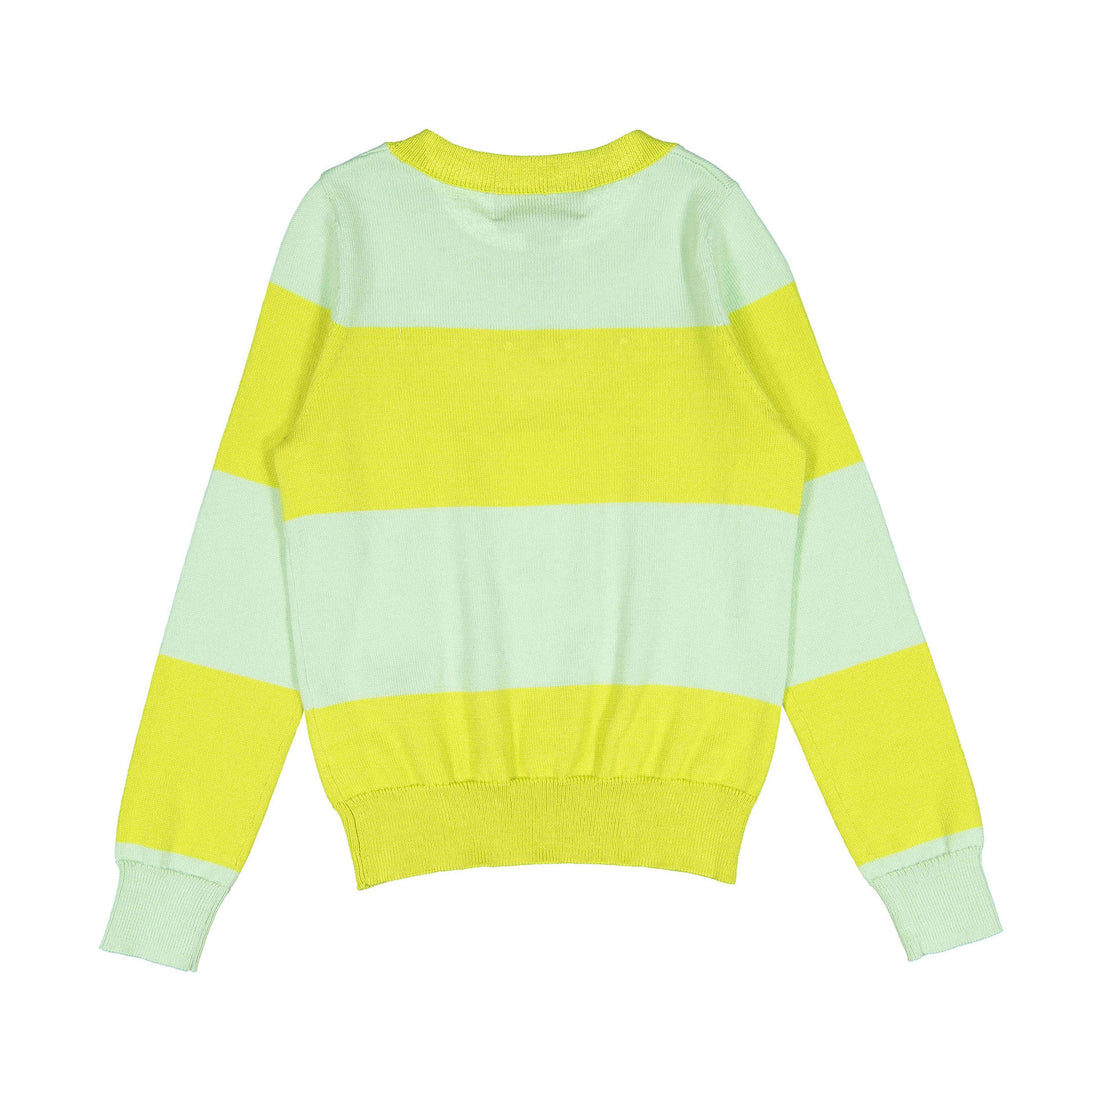 Autumn Cashmere Tennis Ball Rugby Stripe With Grommets Sweater